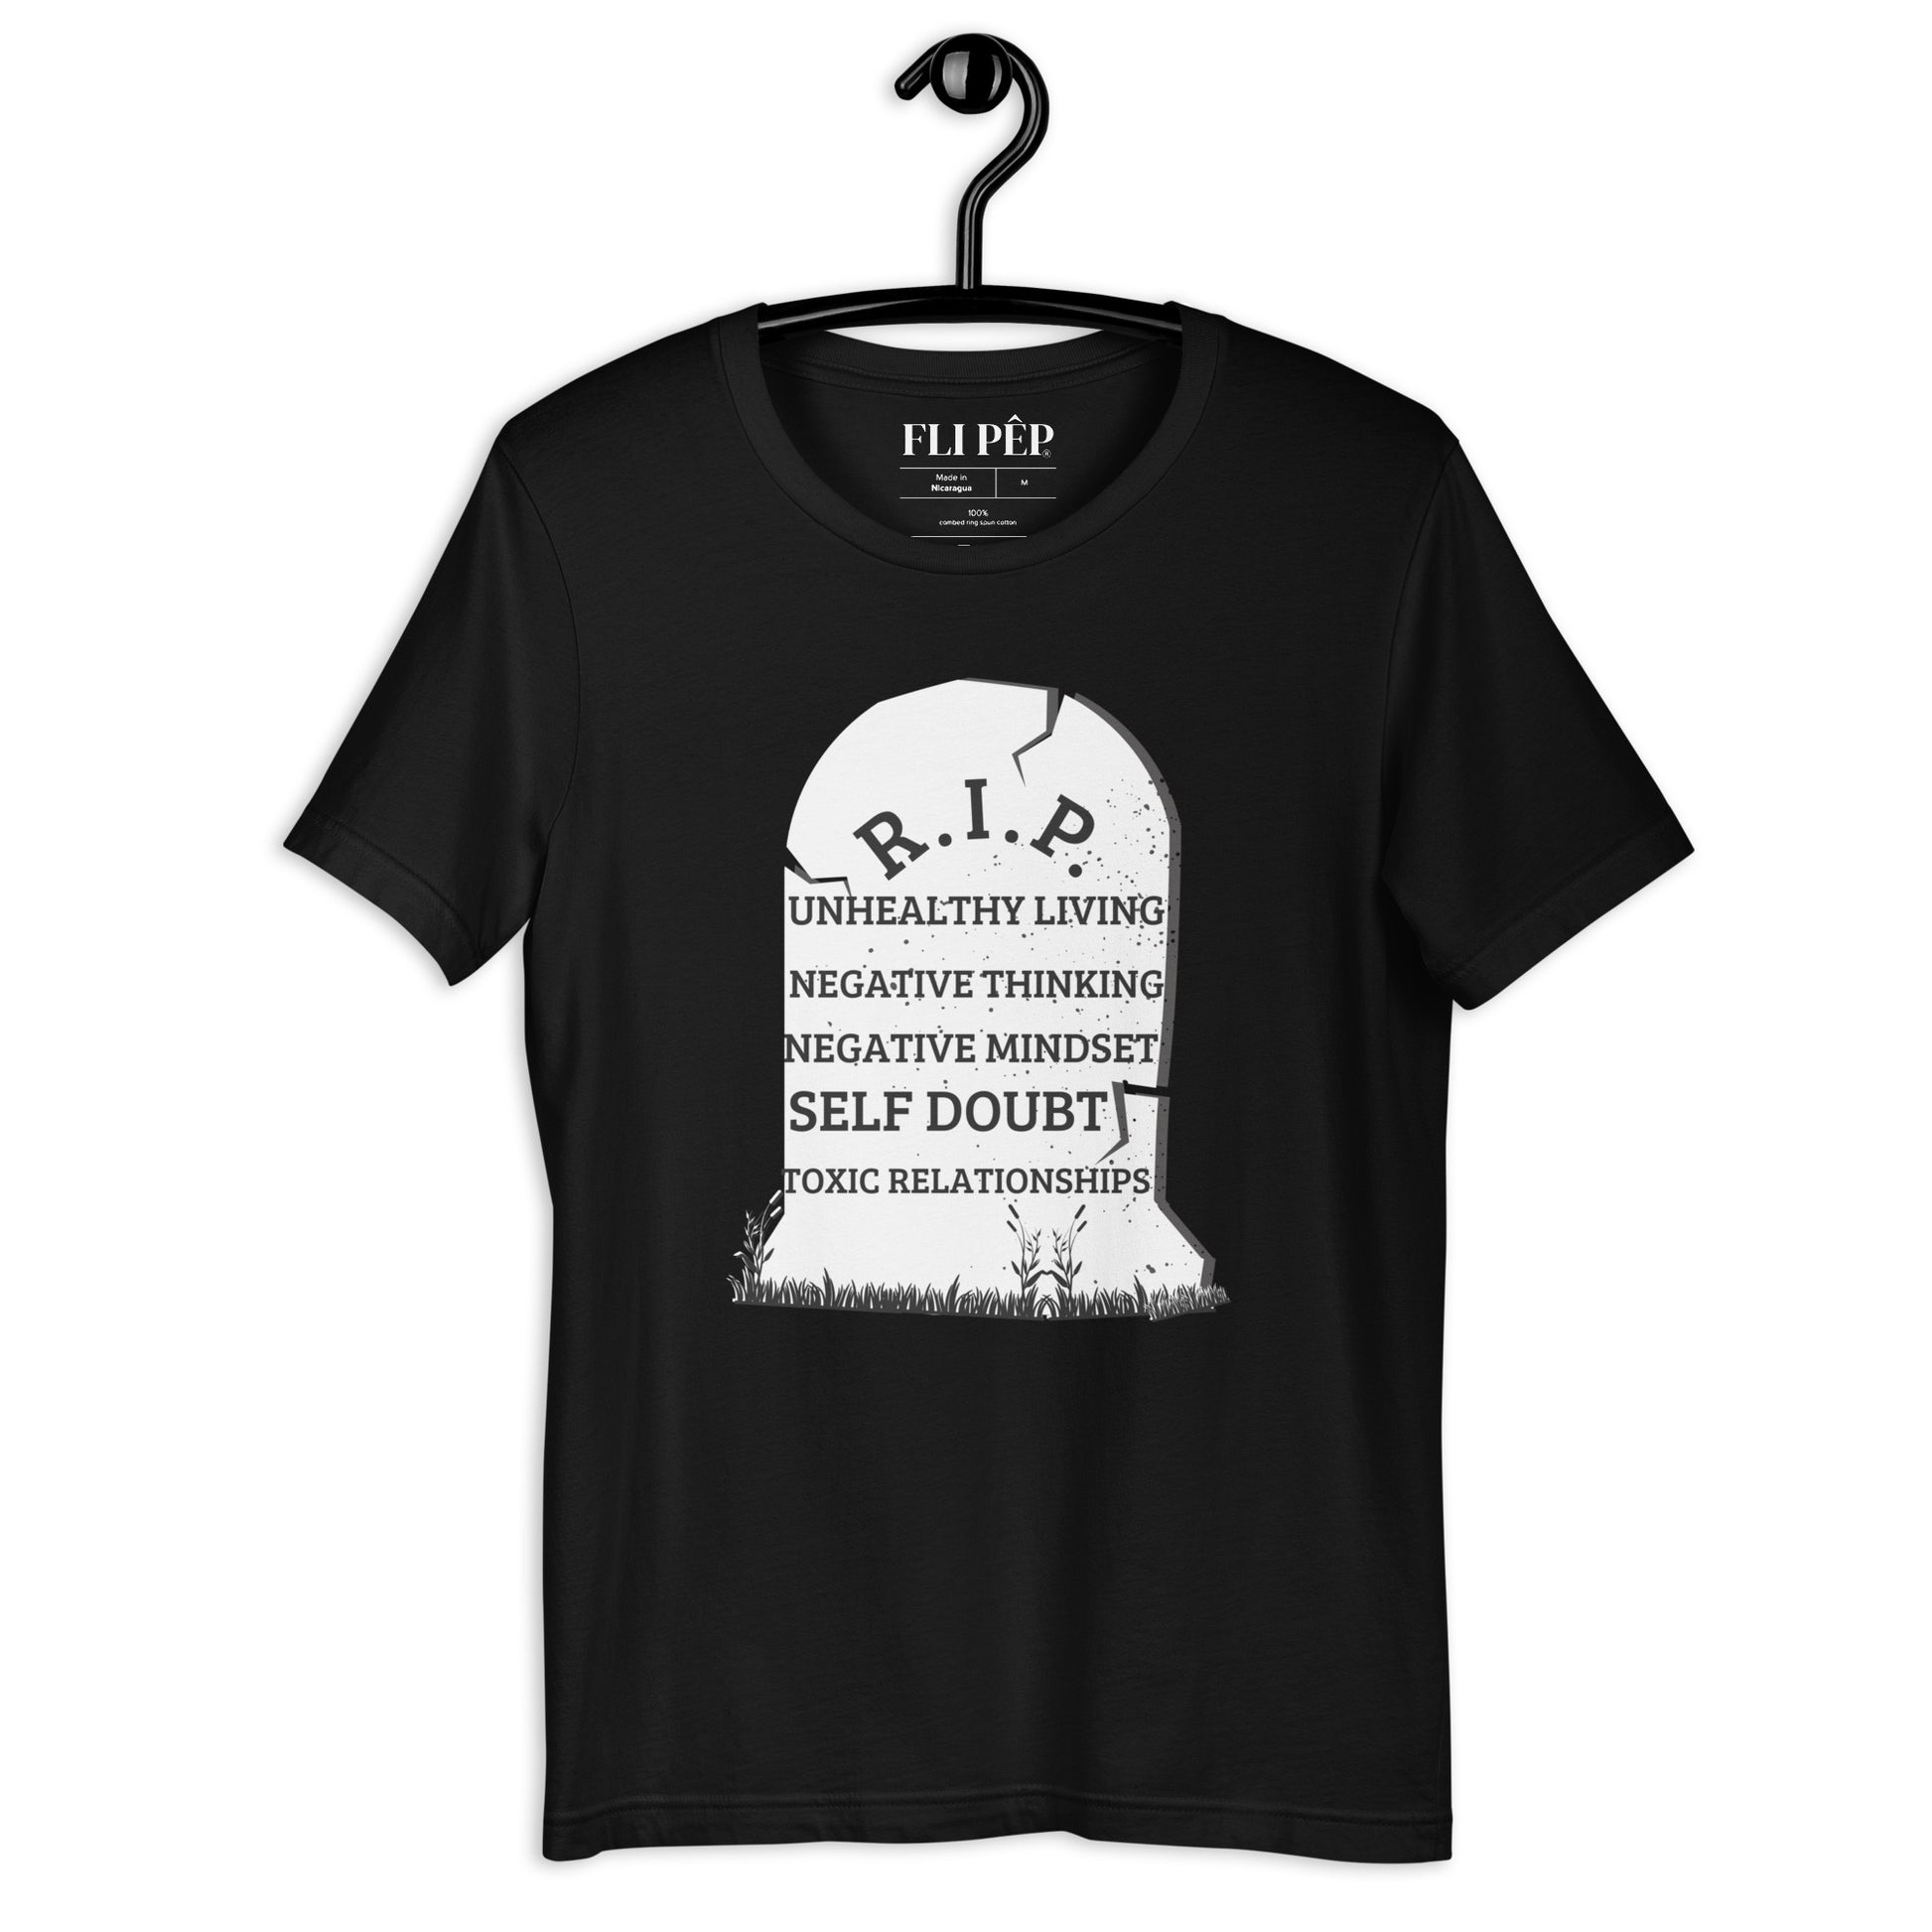  Shop for T-Shirt with Motivational Taglines that Inspire Positive Thinking and Self Belief. Our FLI PÊP! store features Organic Eco-Friendly tees and t-shirts to motivate you to be your best self. Our T-Shirts are made to fit just right and eliminate negative thinking.